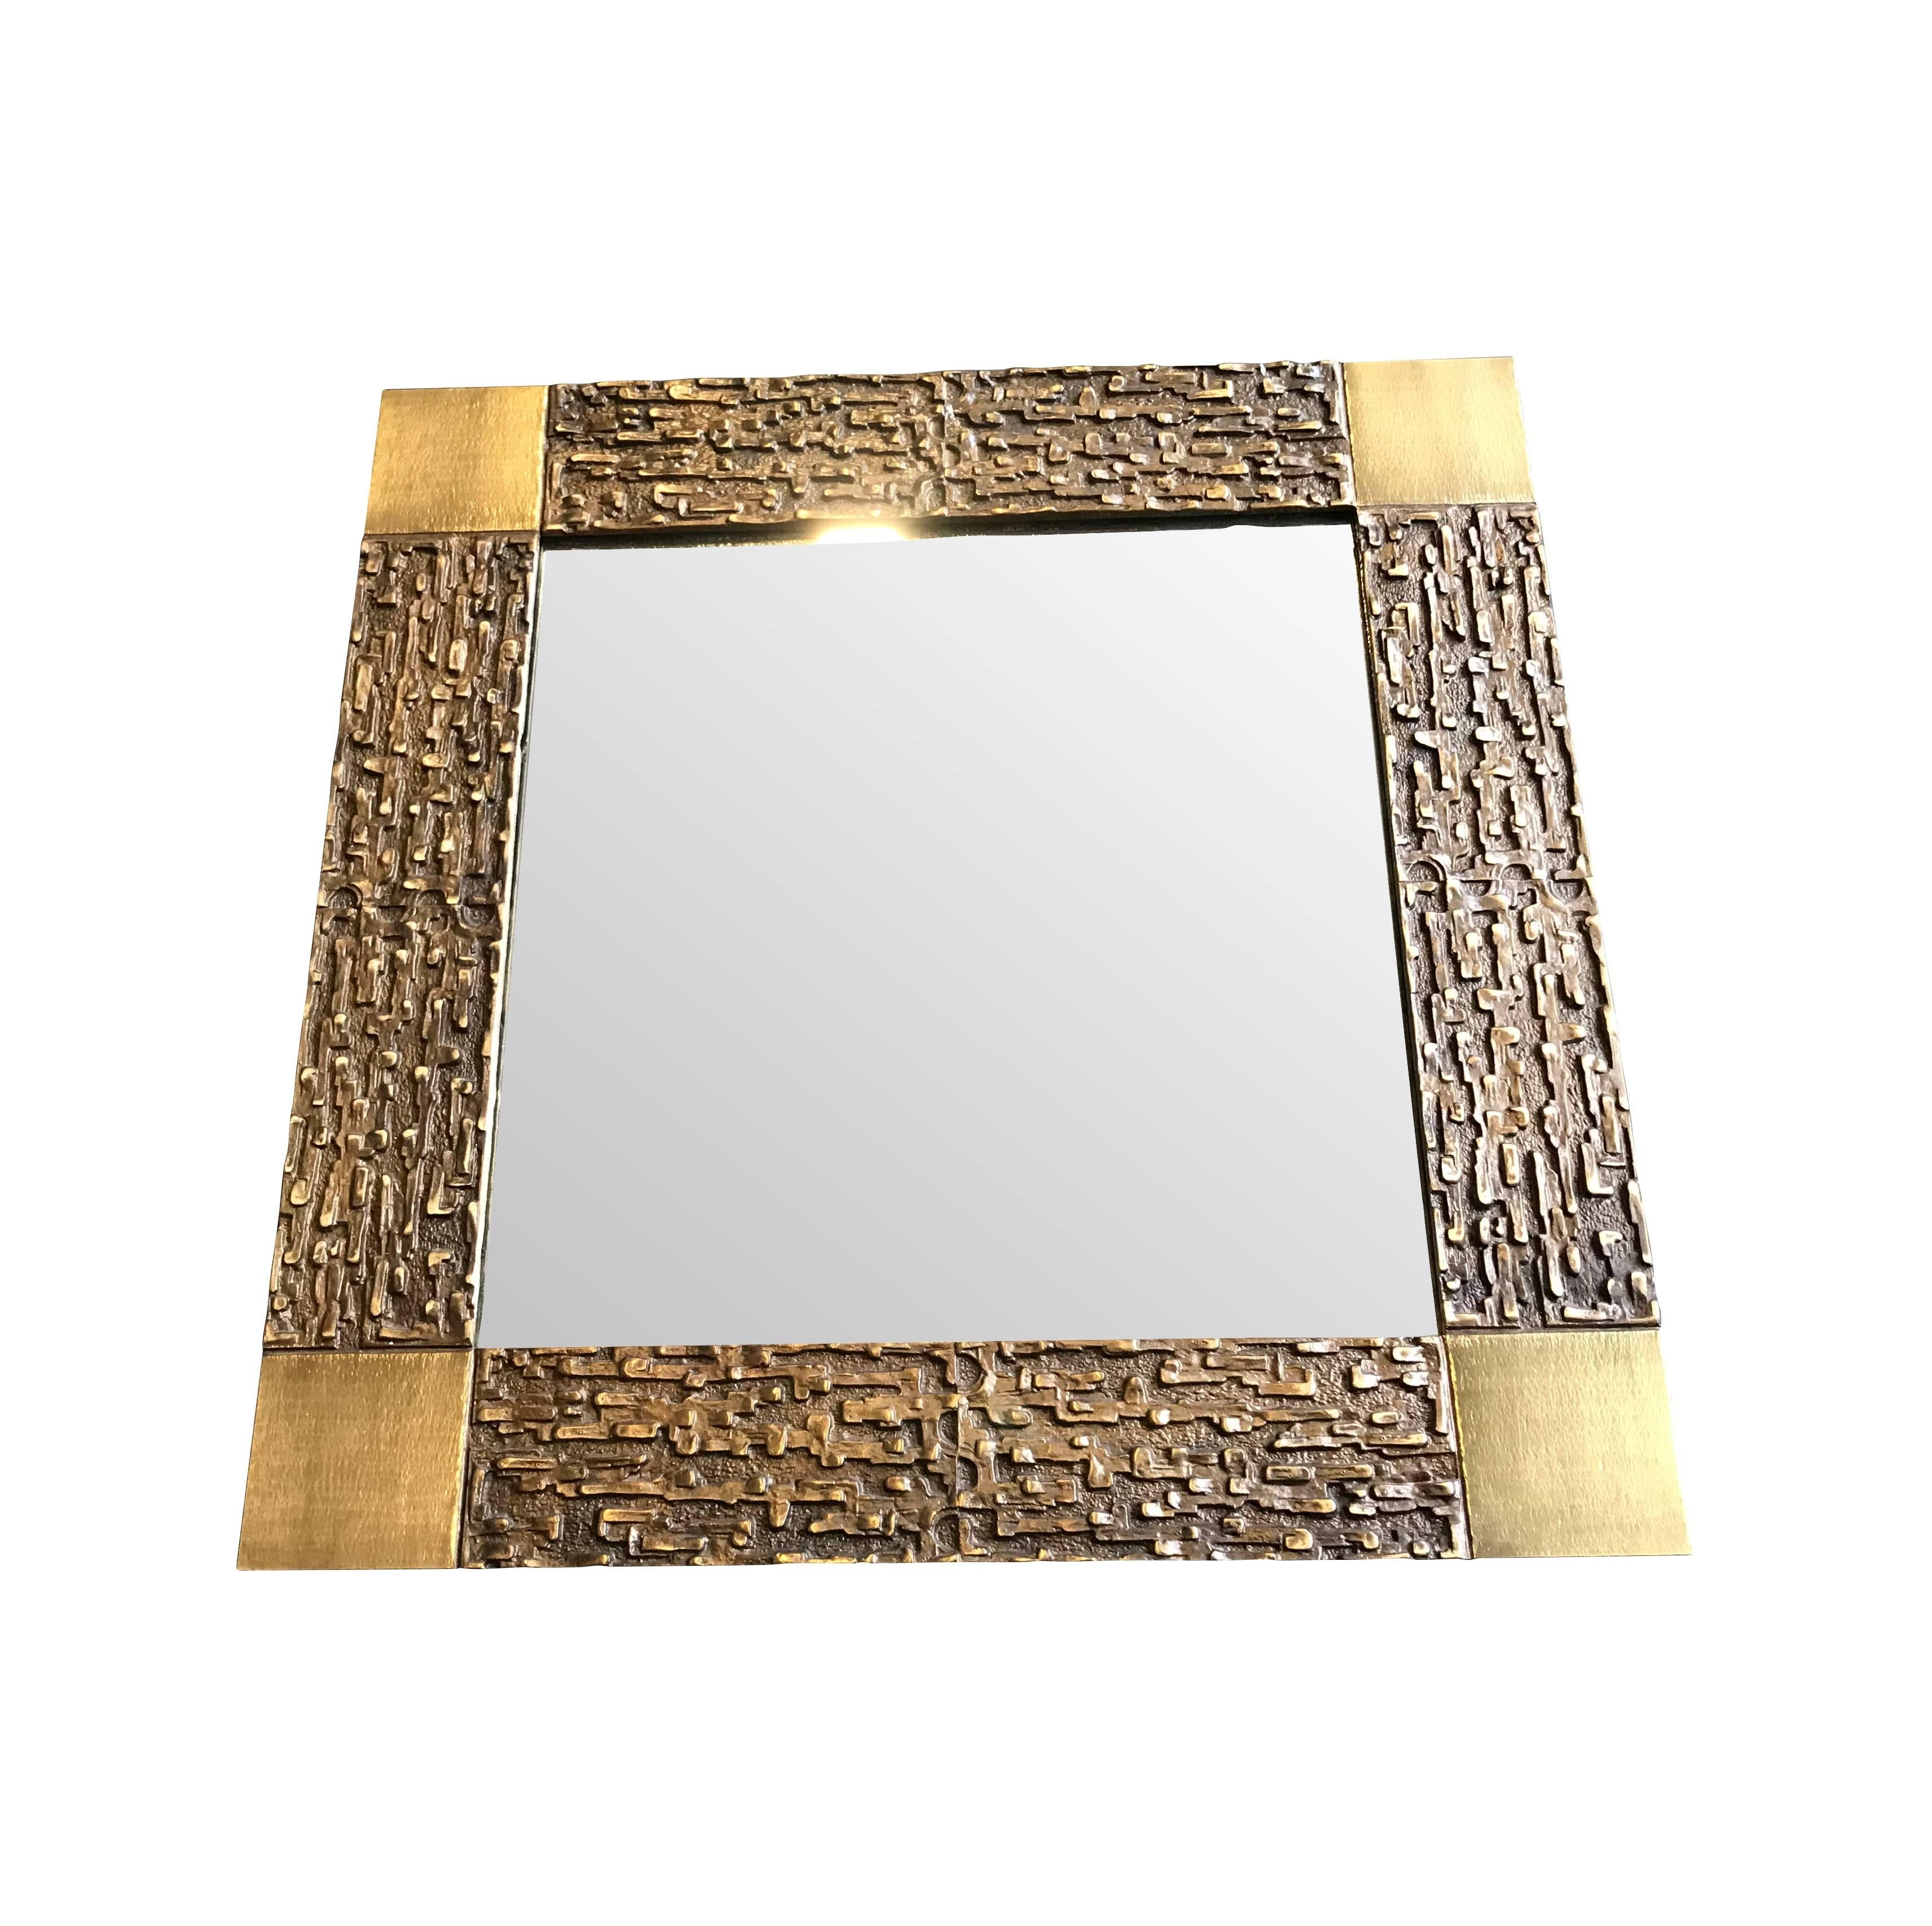 A Luciano Frigerio mirror with sculptural Brutalist solid bronze frame.